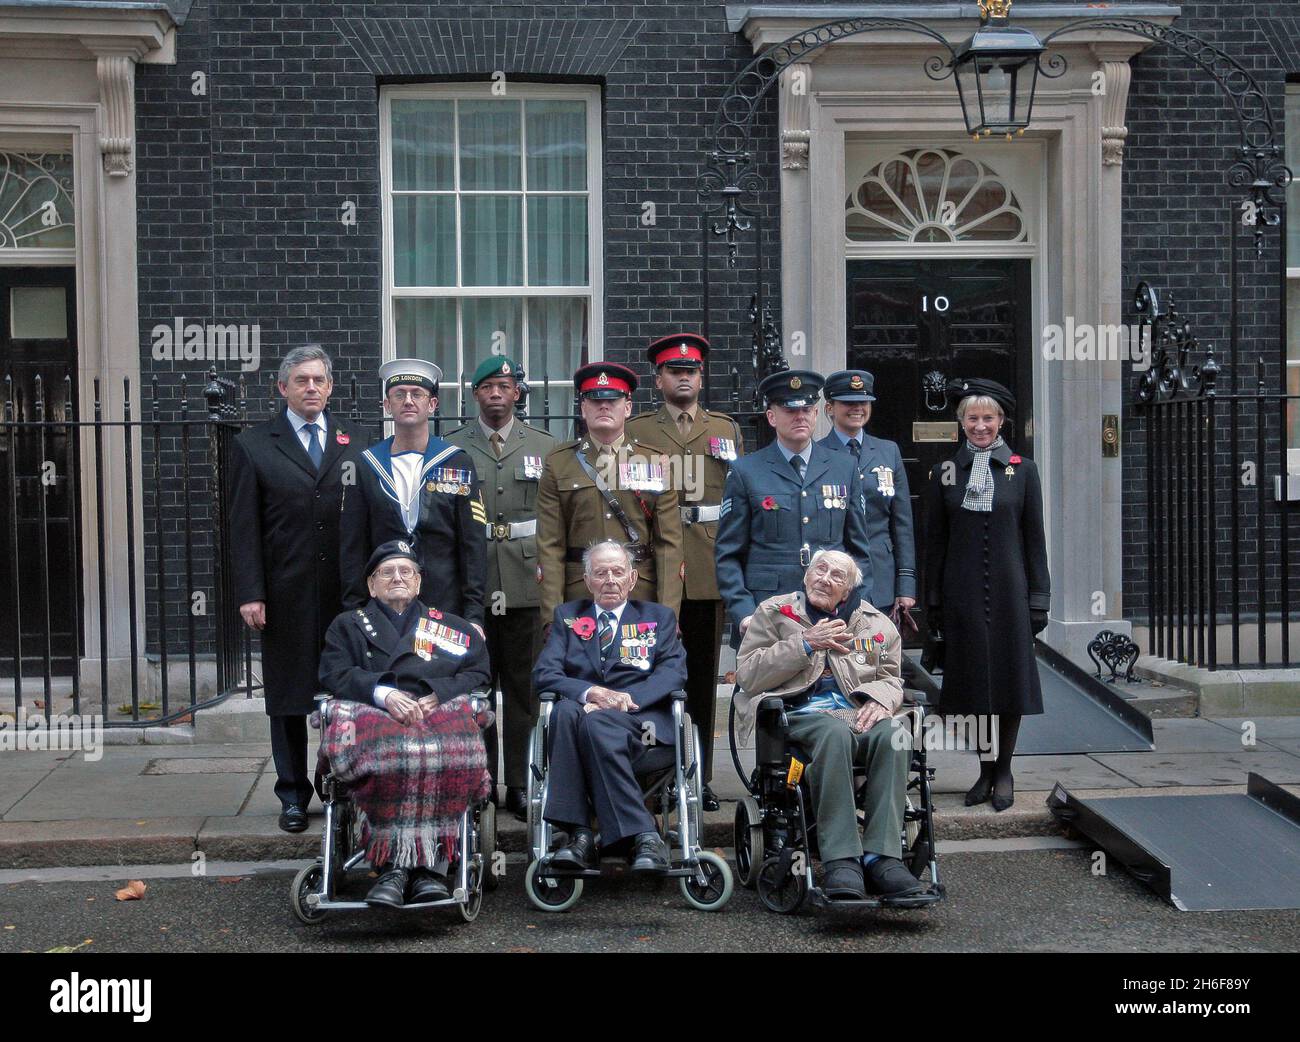 The three last surviving British World War I veterans, L-R Bill Stone, Harry Patch and Henry Allingham joined Gordon Brown in Downing Street, after attending a ceremony at the Cenotaph to mark the end of the War ninety years ago.  Stock Photo